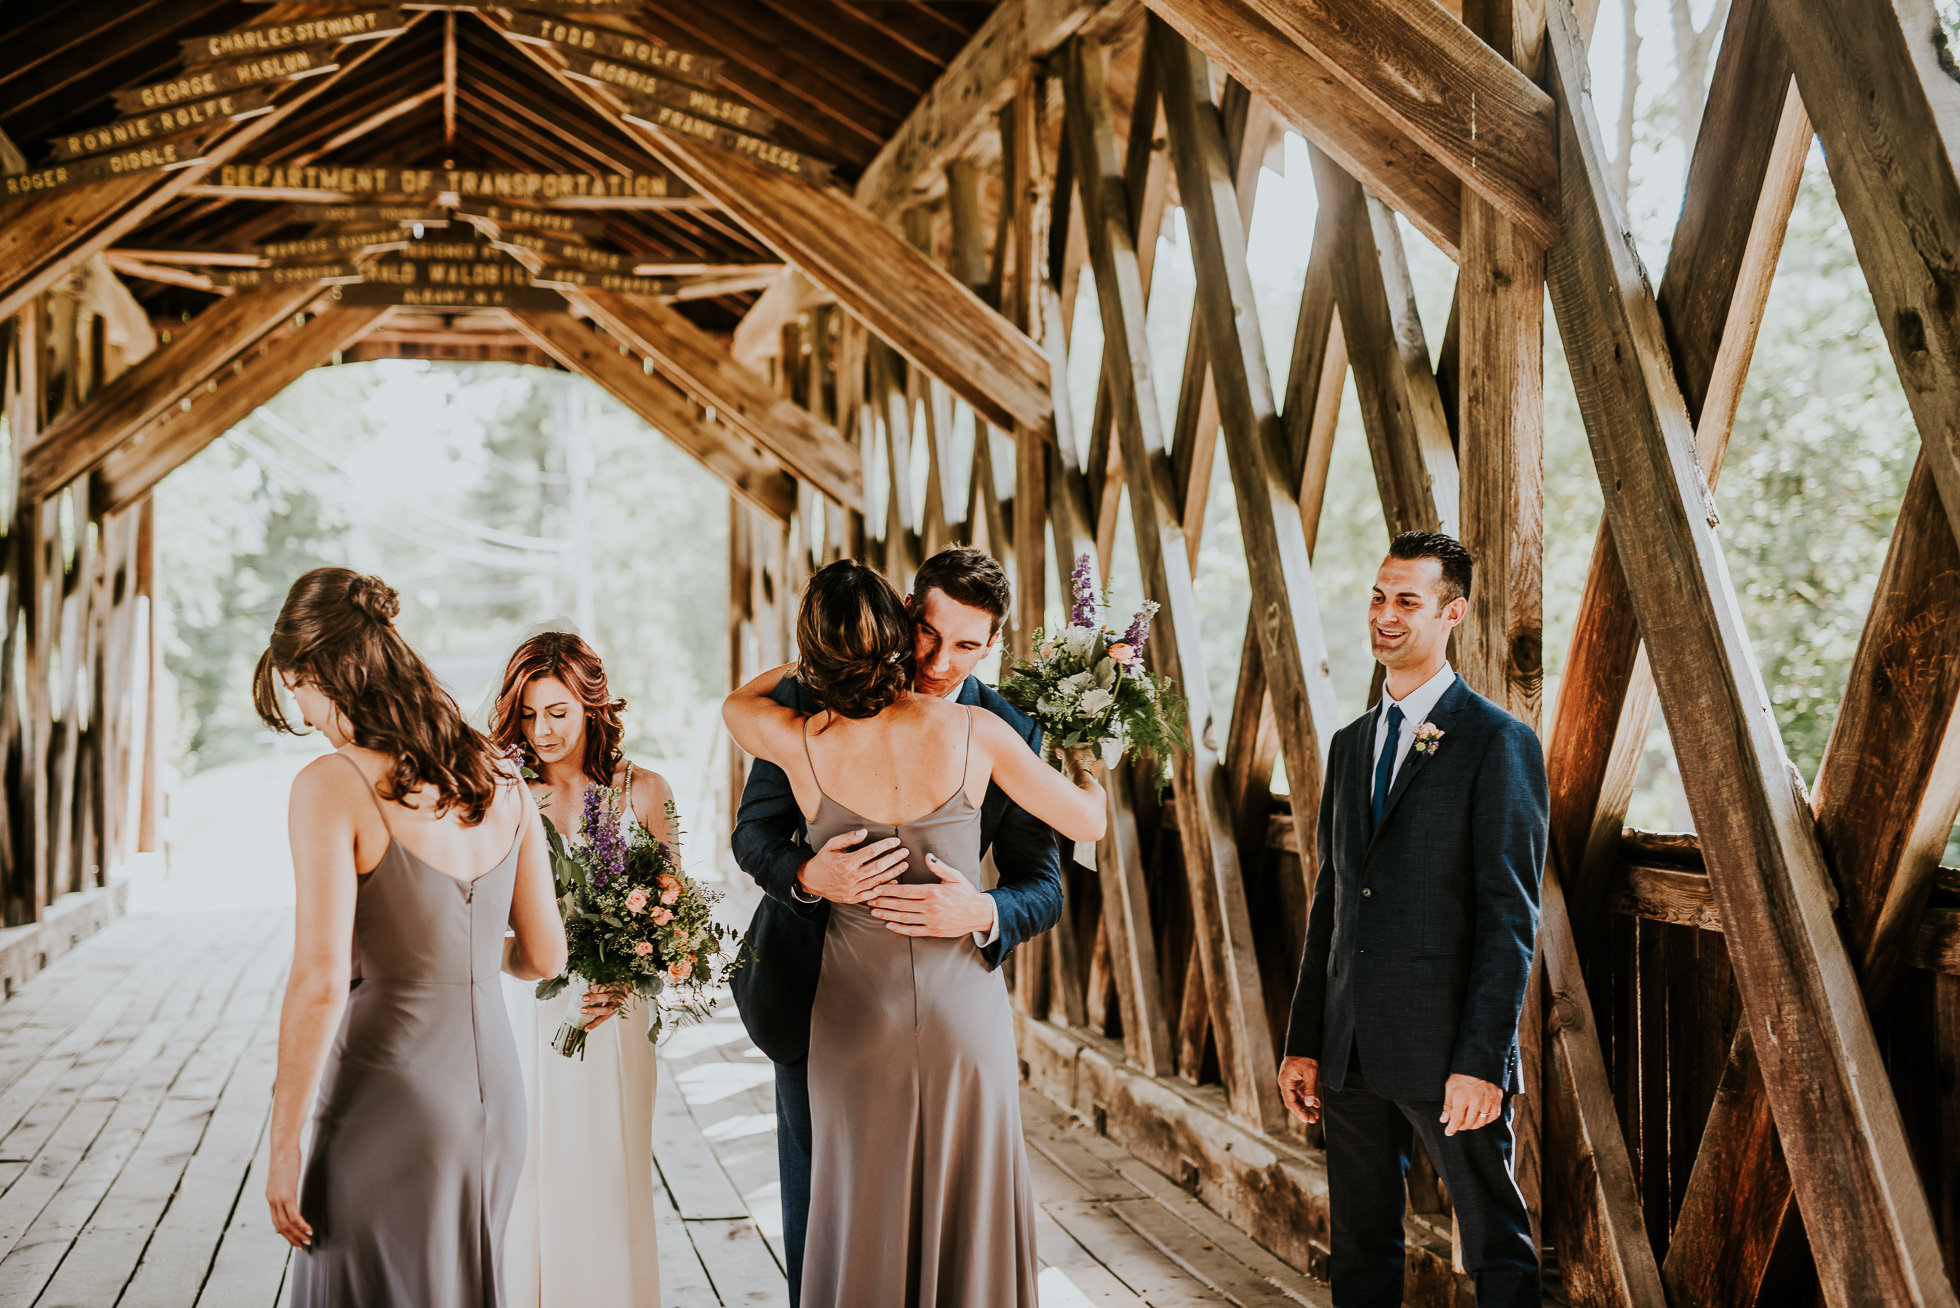 bridal party on bridge at olde tater barn wedding in central bridge, ny photographed by traverse the tides